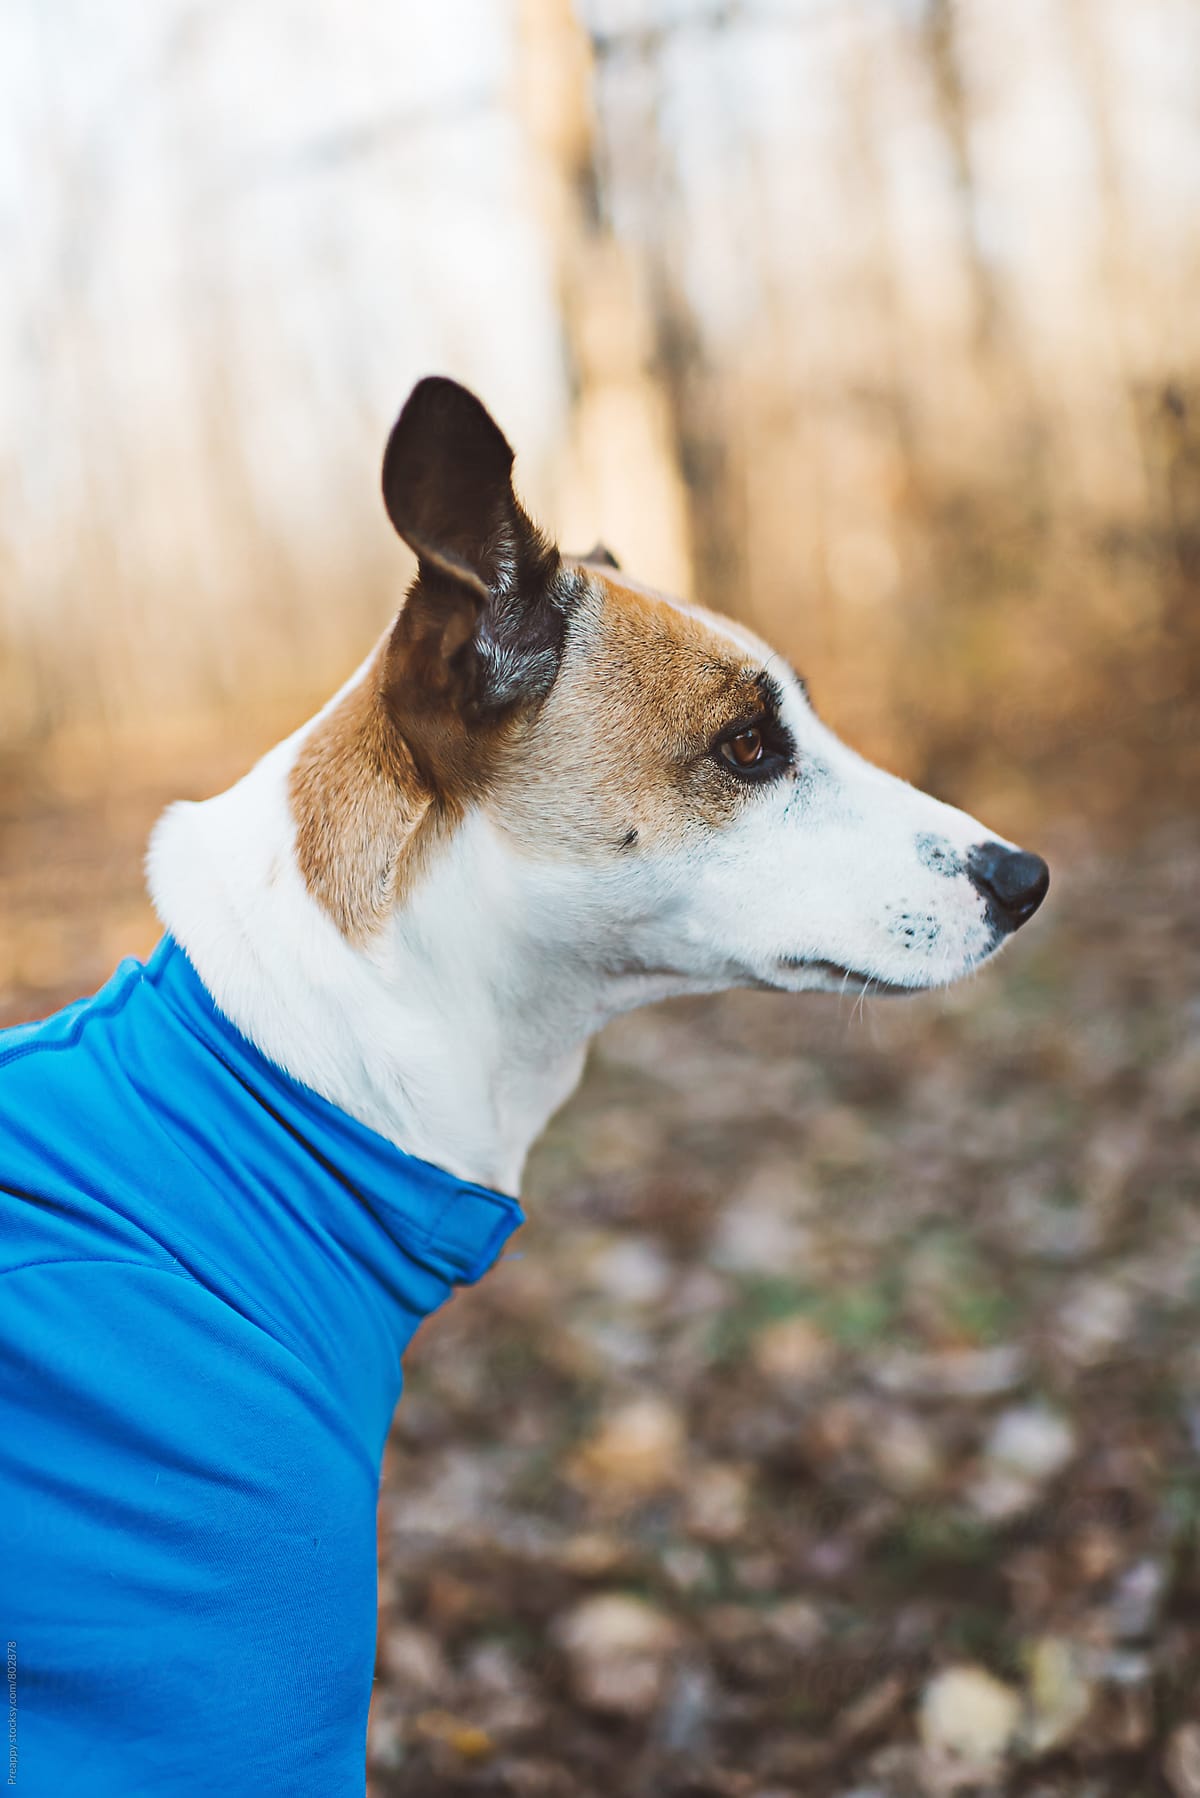 Side profile of a dog in a onesie outdoors